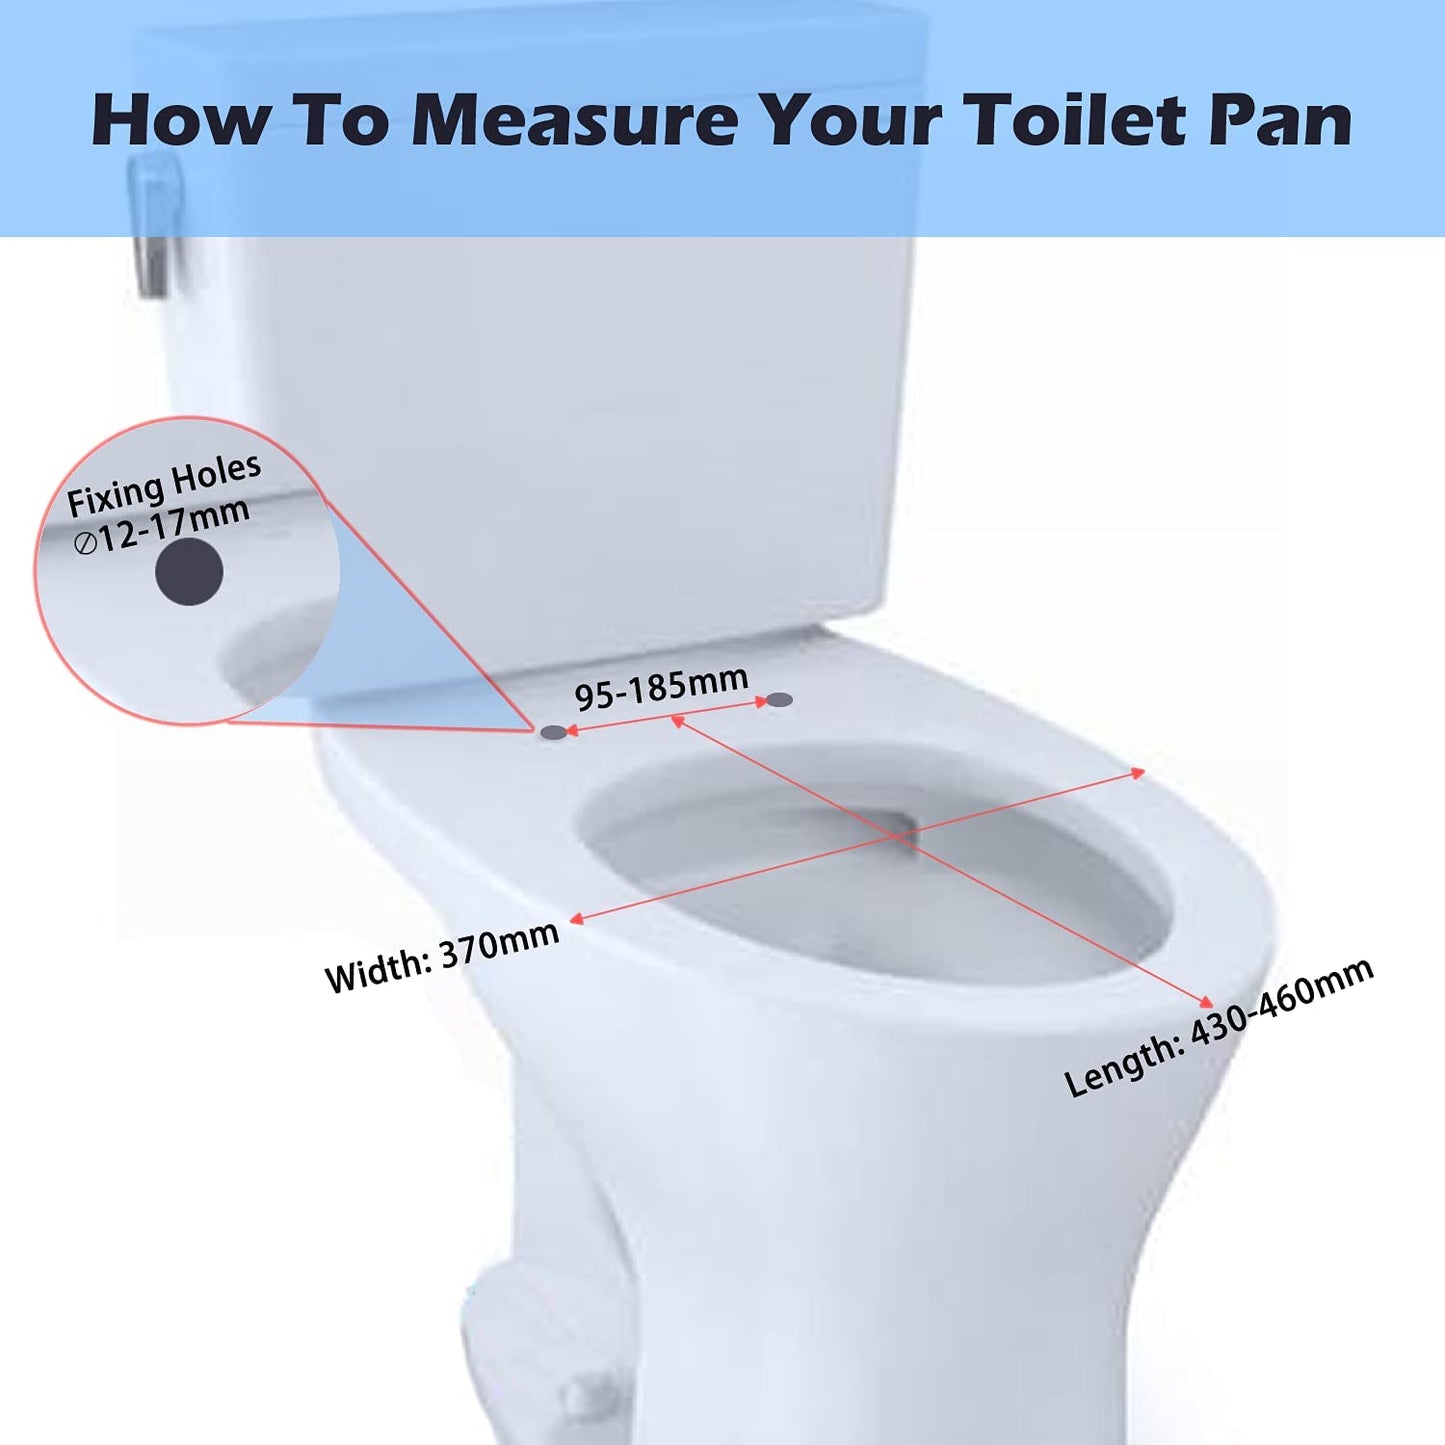 Oval Shape Toilet Seat Soft Close Top Fixing with Adjustable Hinges